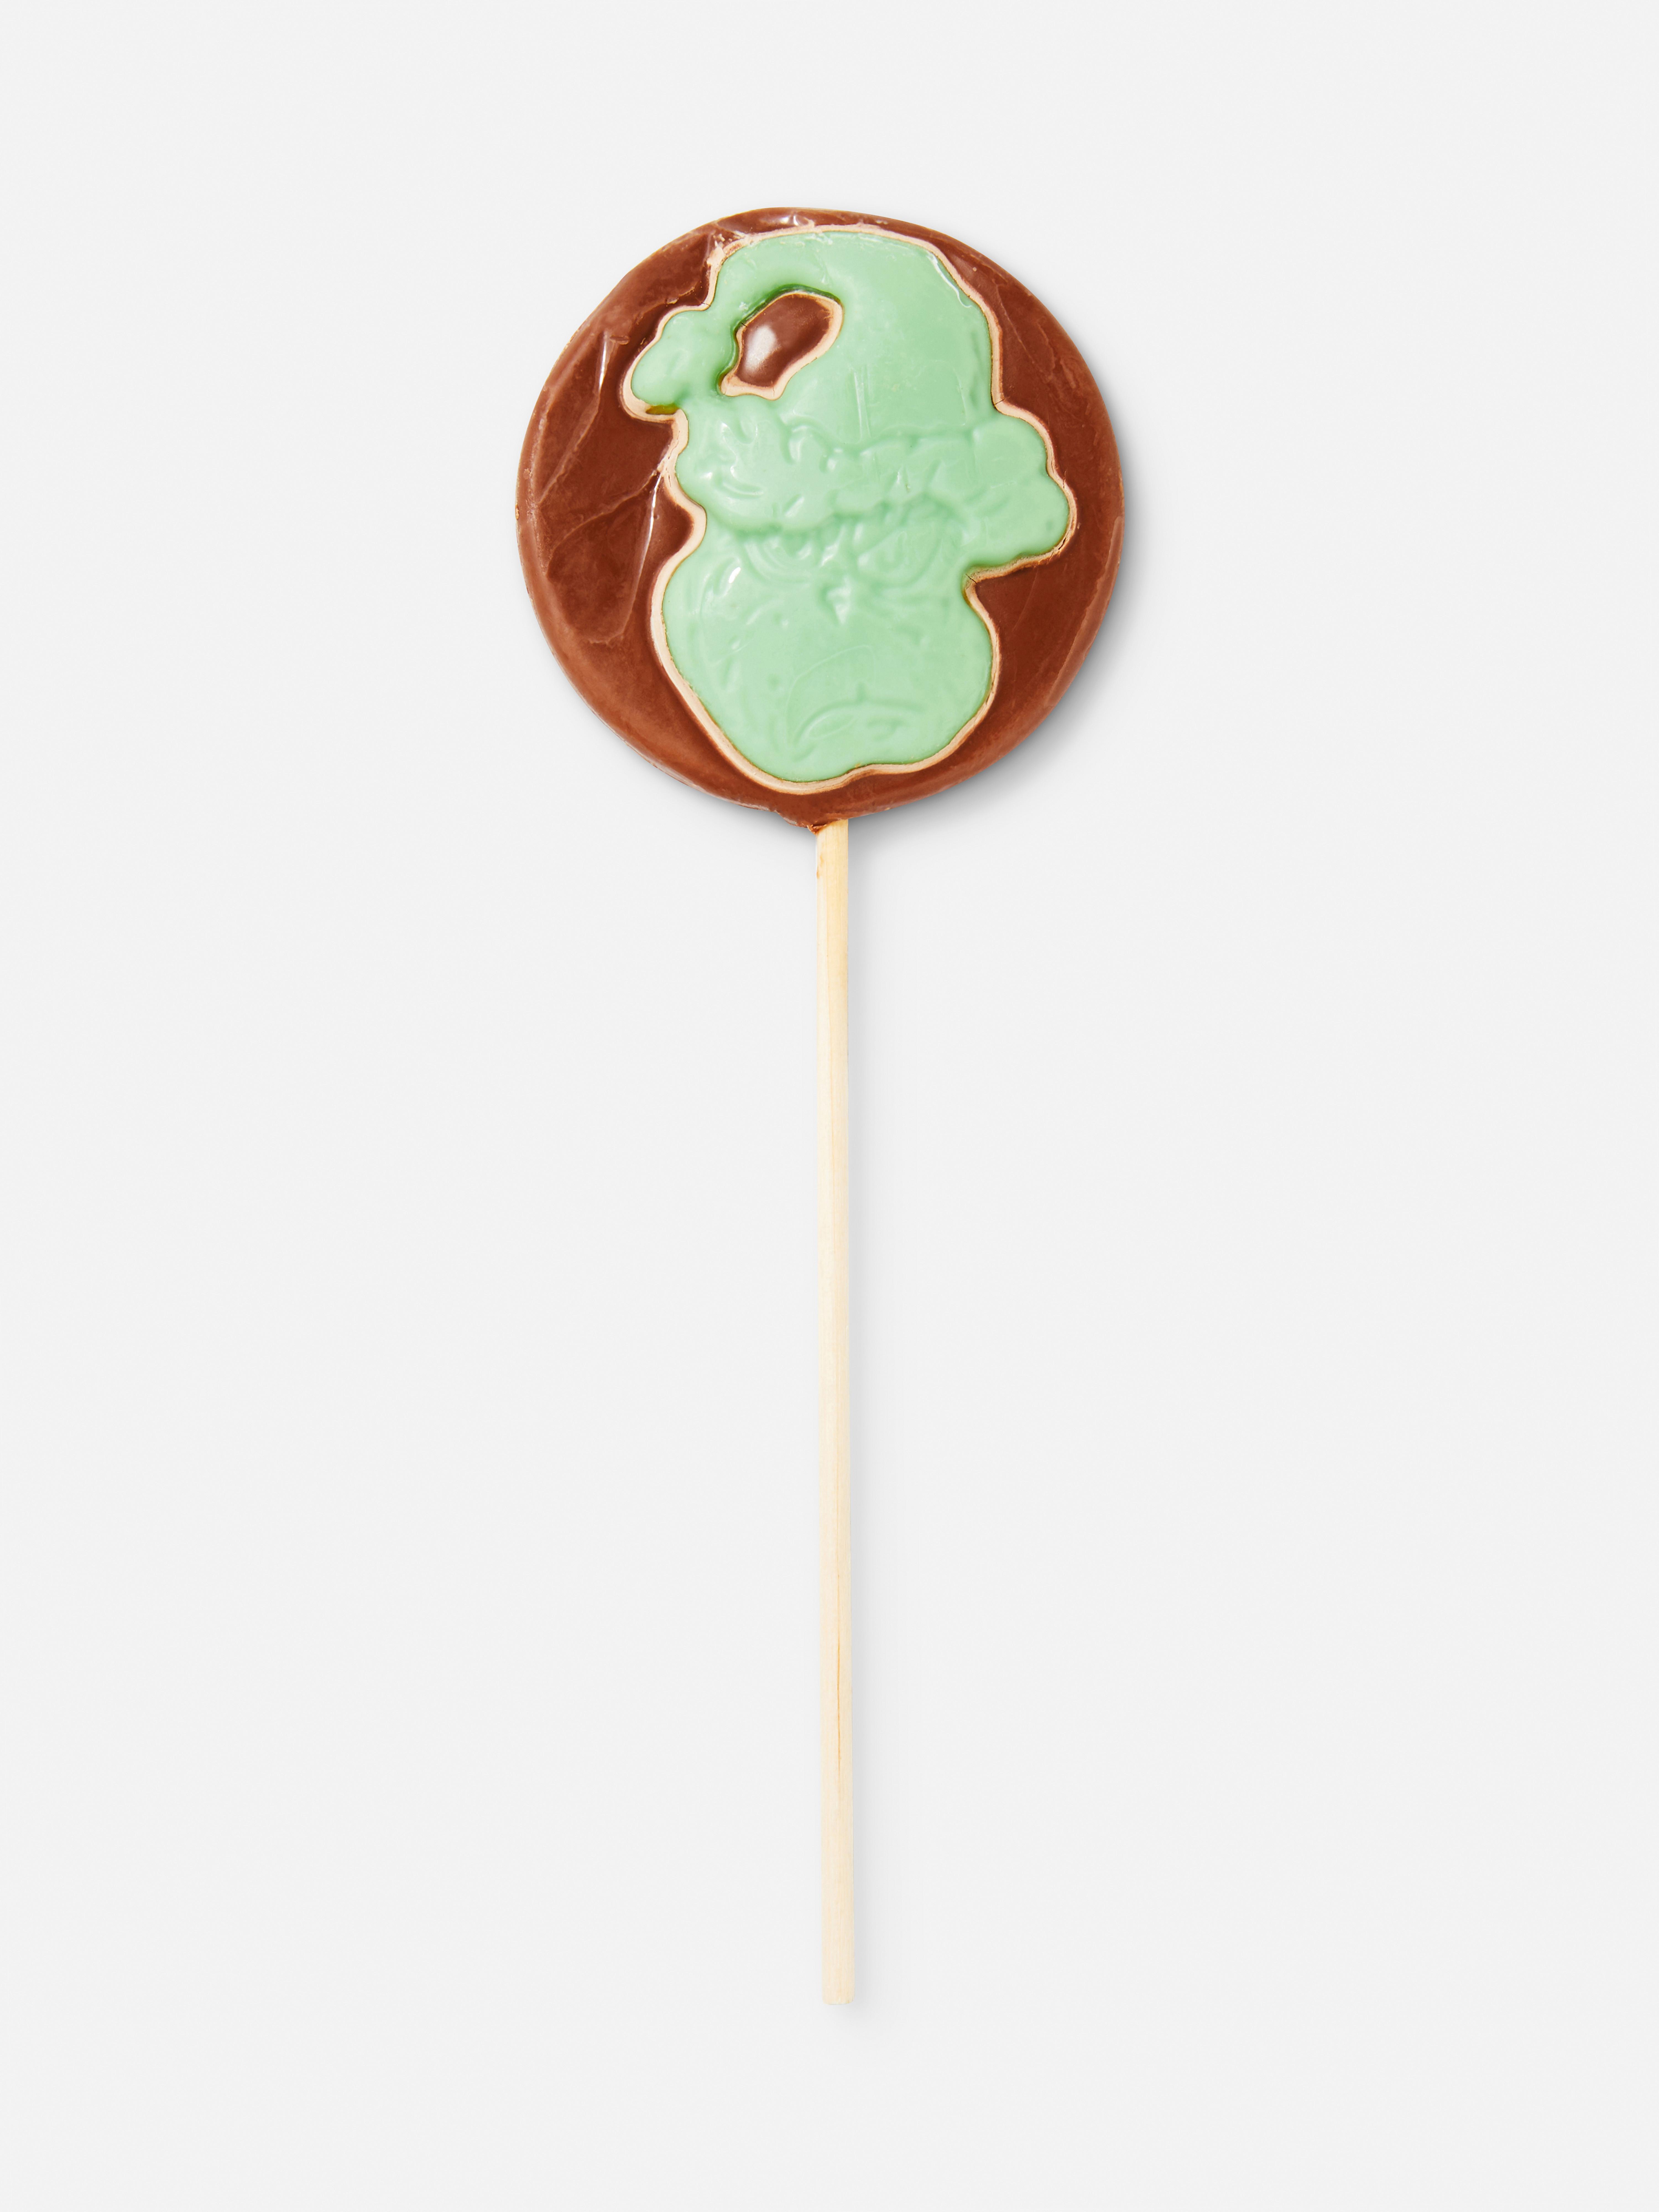 The Grinch Chocolate Lolly